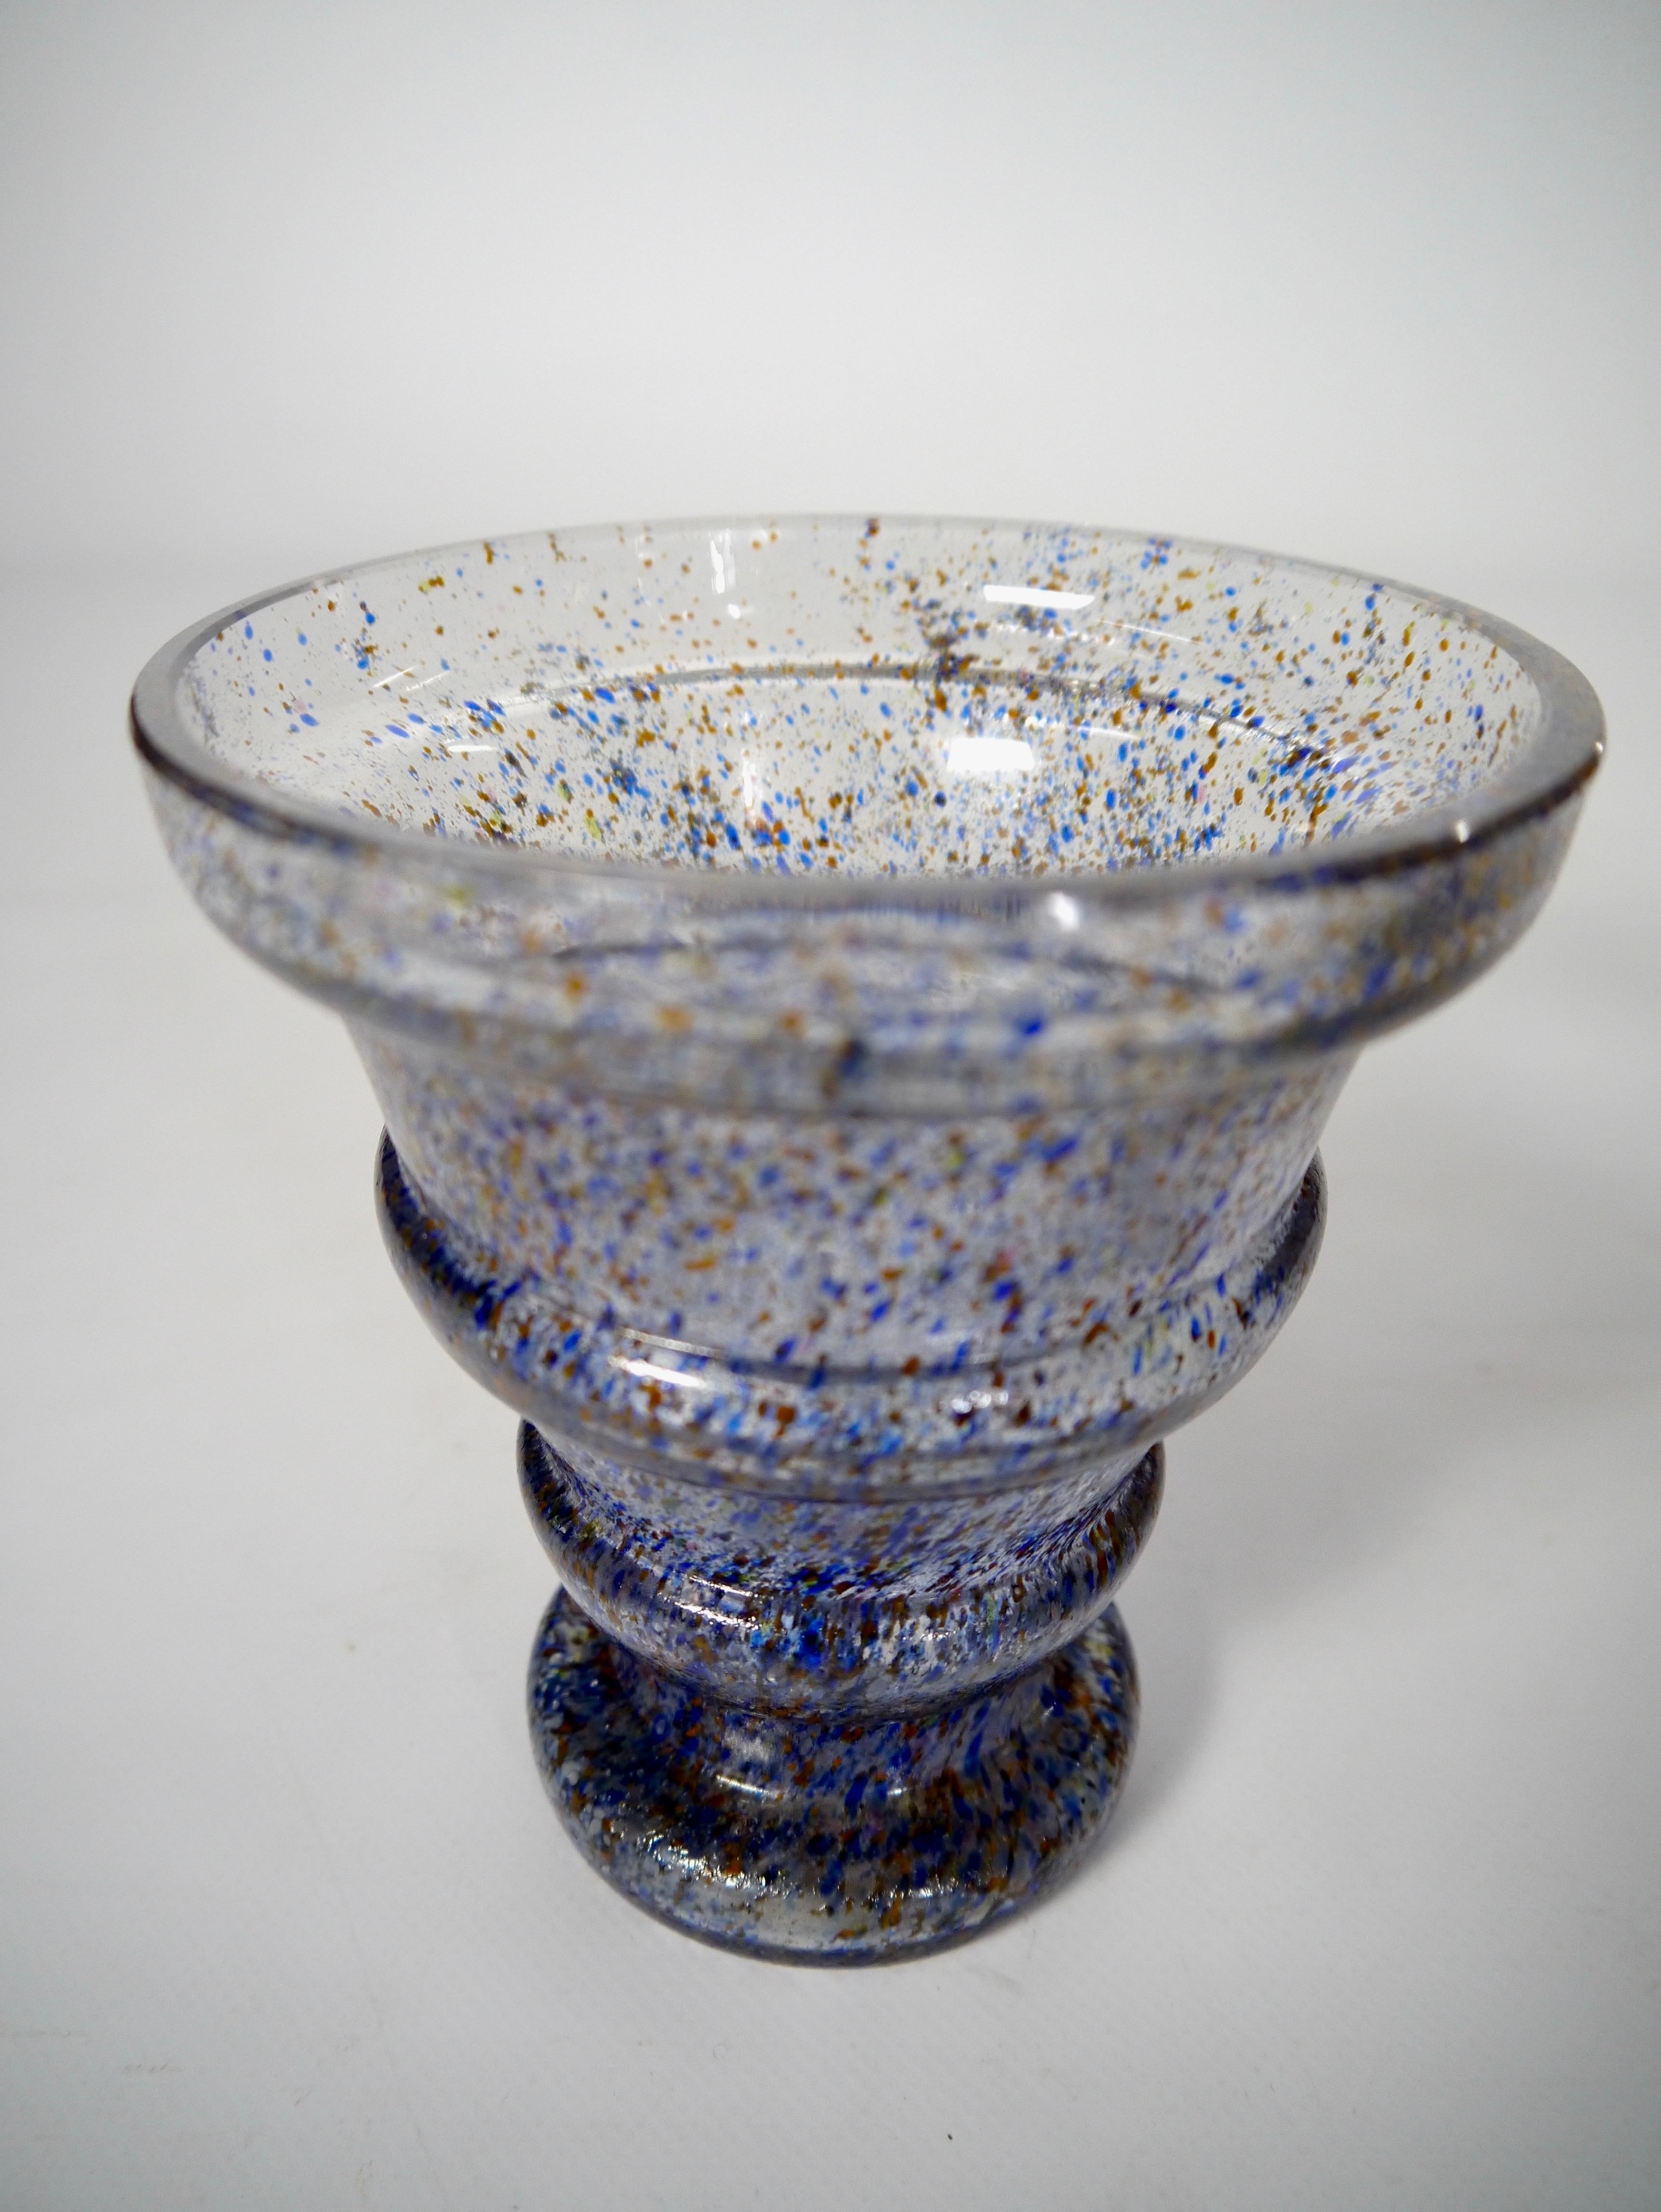 20th Century Early Modernist Glass Vase by Sven X:et Erixson for Kosta, Sweden, 1930s For Sale